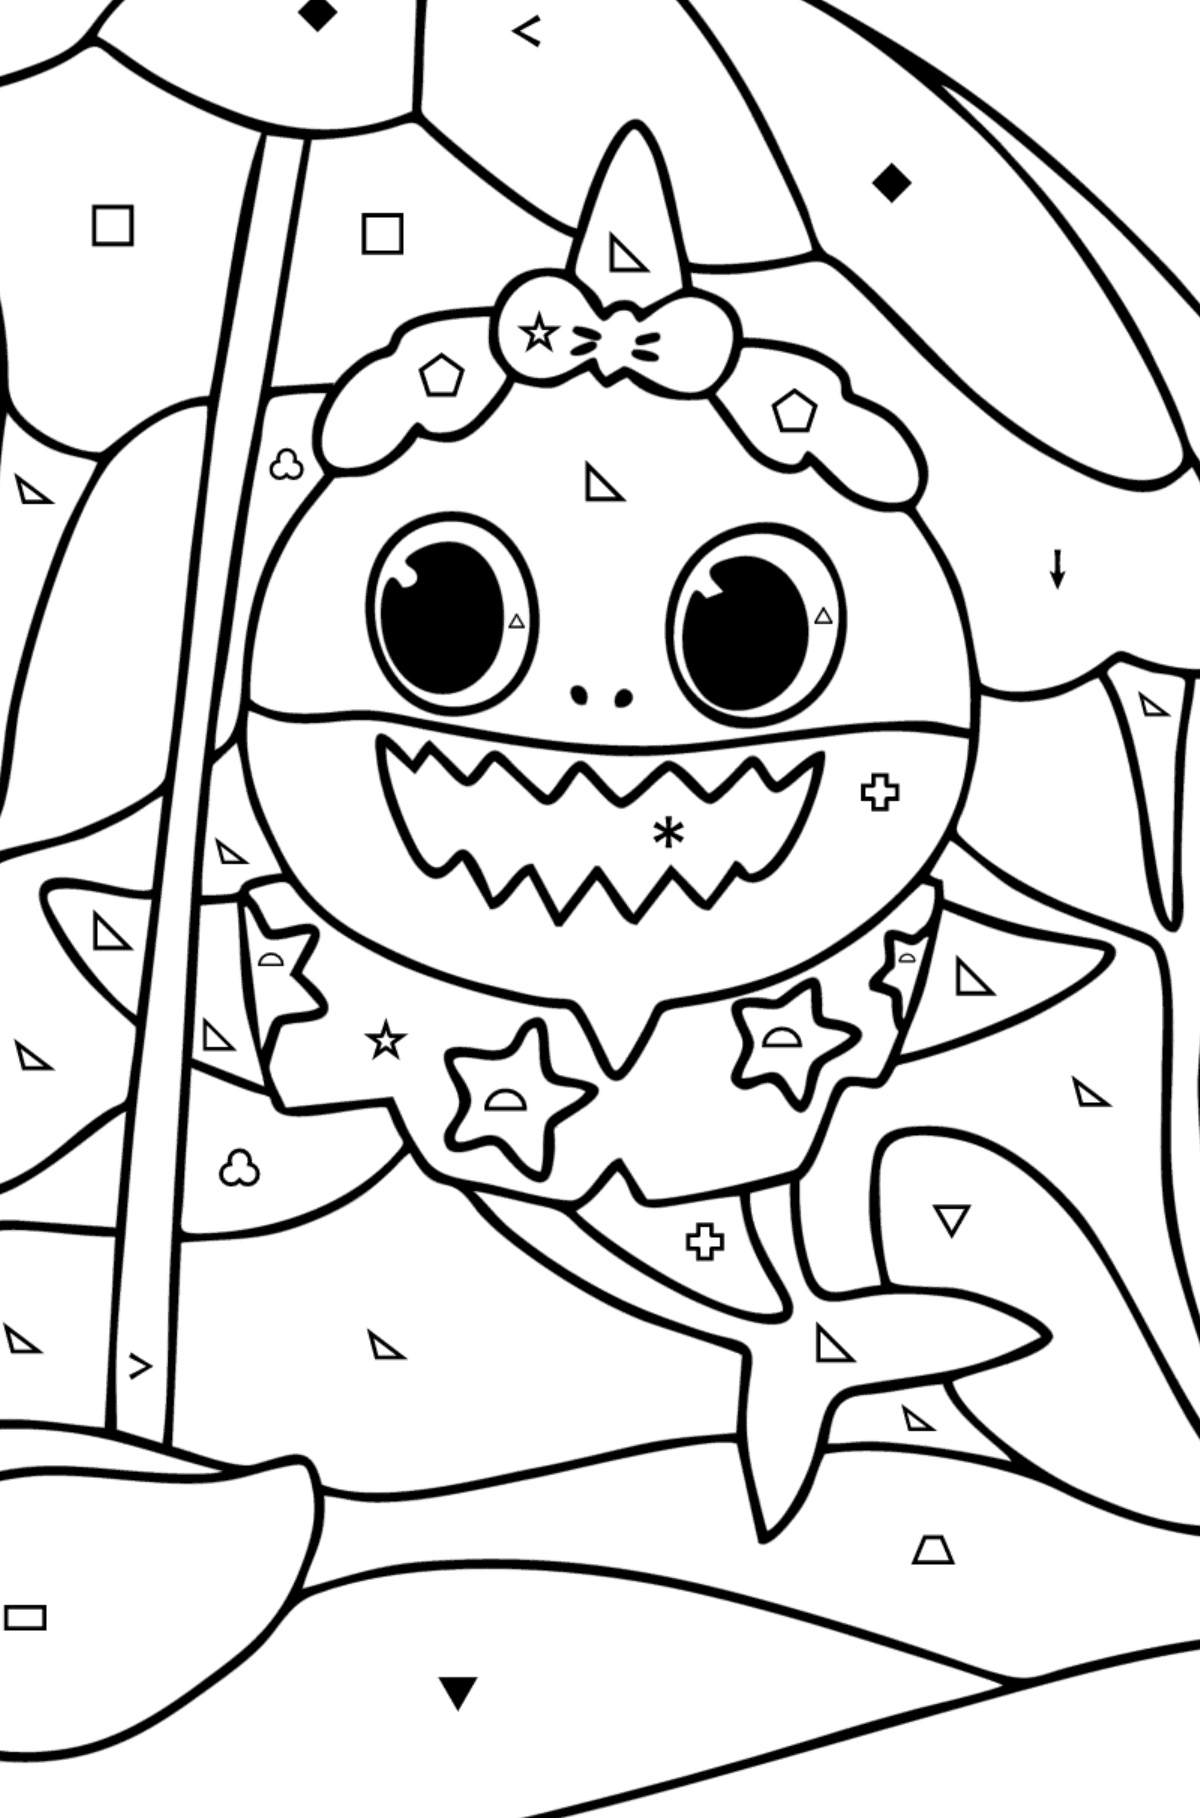 Baby shark Cute Mom coloring page - Coloring by Symbols and Geometric Shapes for Kids